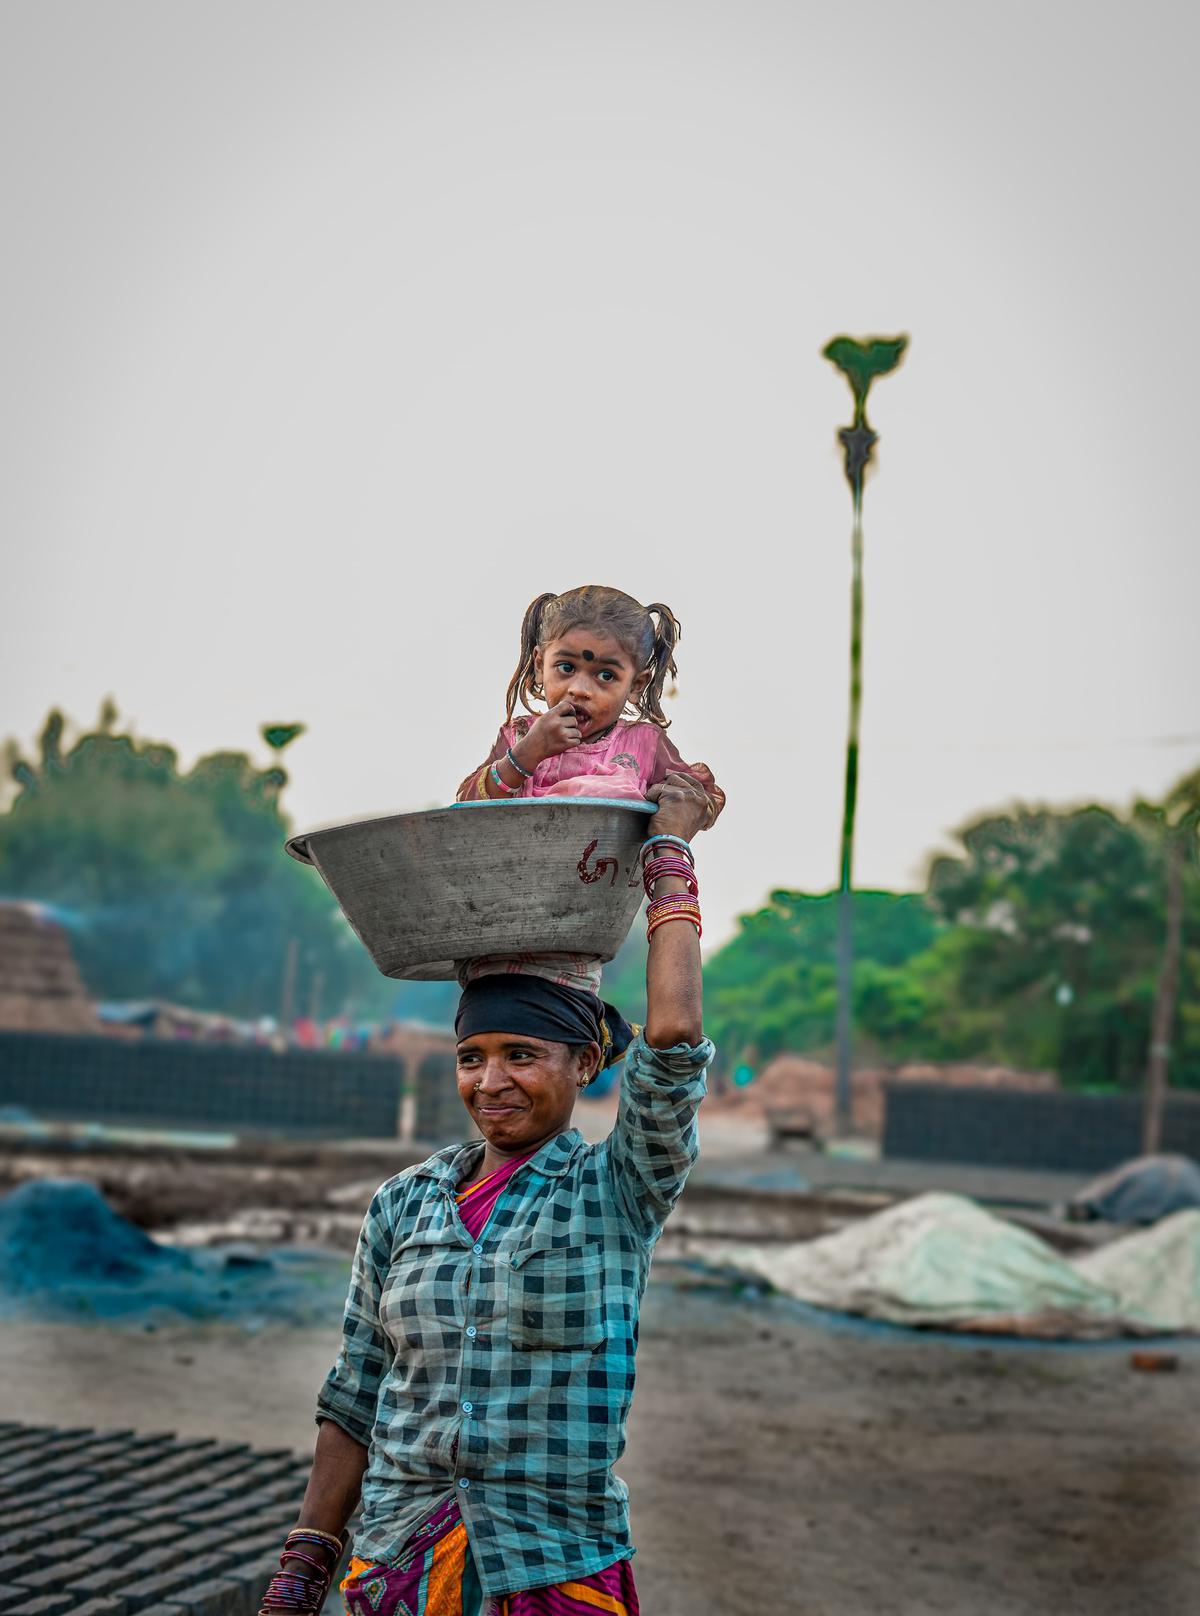 A daily wage labourer carrying her child in the tub as she heads for work. The picture taken by Kotni Deva Sahayam will be one of the exhibits at the photography exhibition in Andhra University in Visakhapatnam.